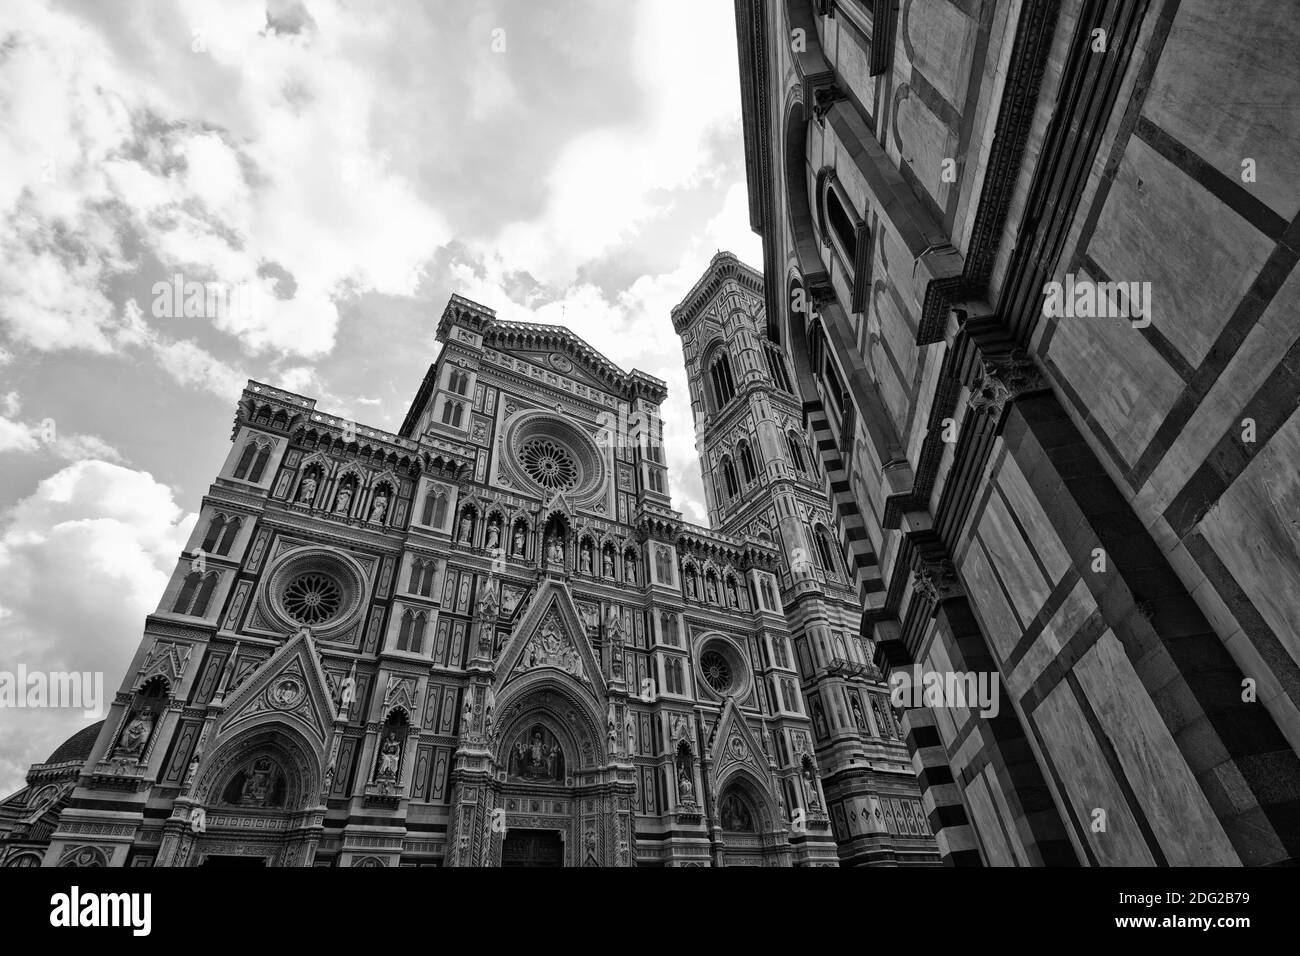 Piazza del Duomo, Florence Banque D'Images